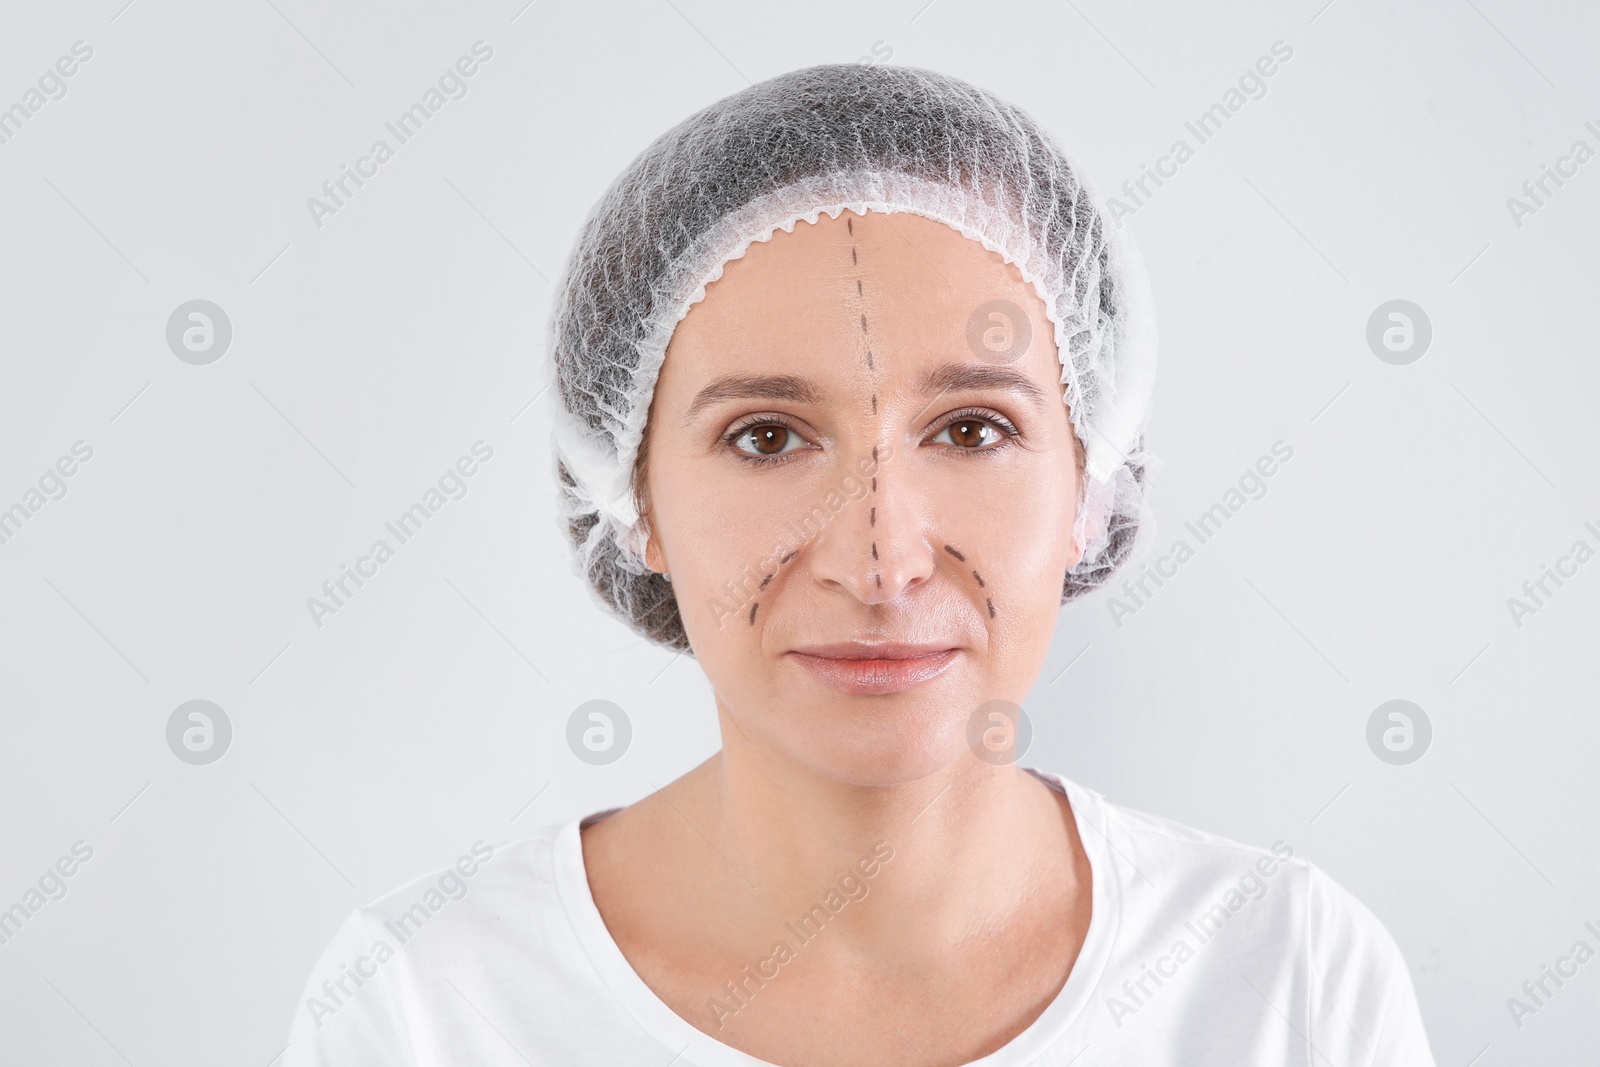 Photo of Portrait of mature woman with marks on face preparing for cosmetic surgery against white background